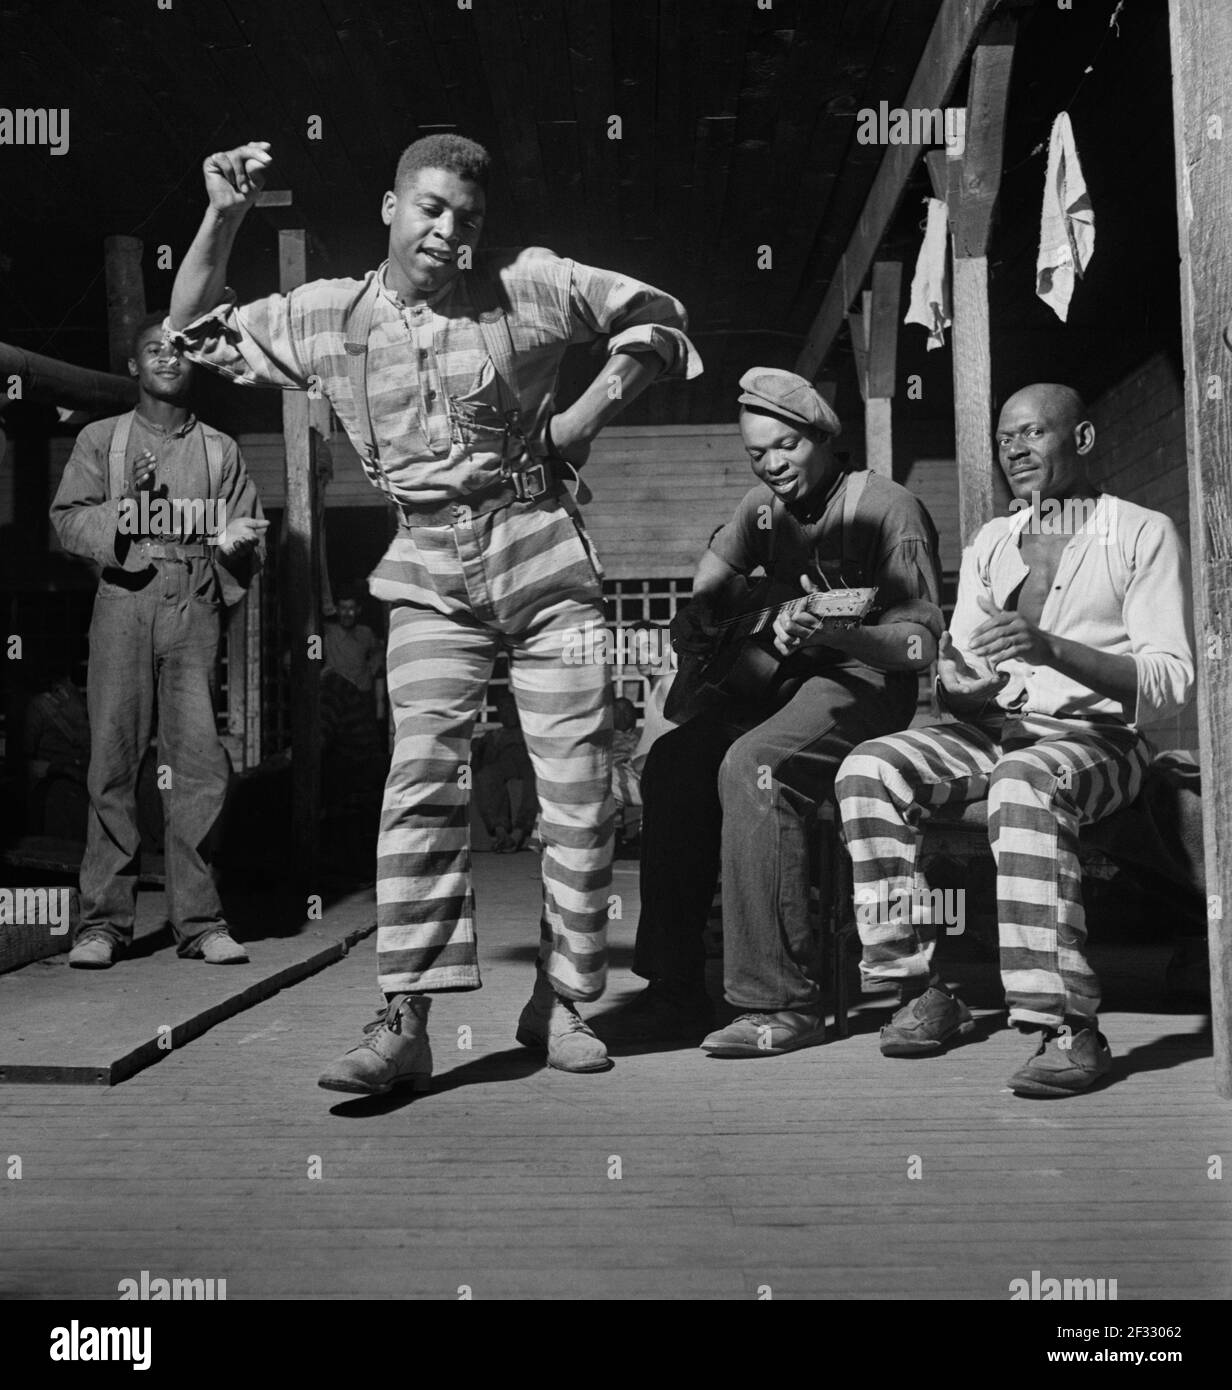 Convicts playing music and dancing, Greene County, Georgia, USA, Jack Delano, U.S. Farm Security Administration, May 1941 Stock Photo